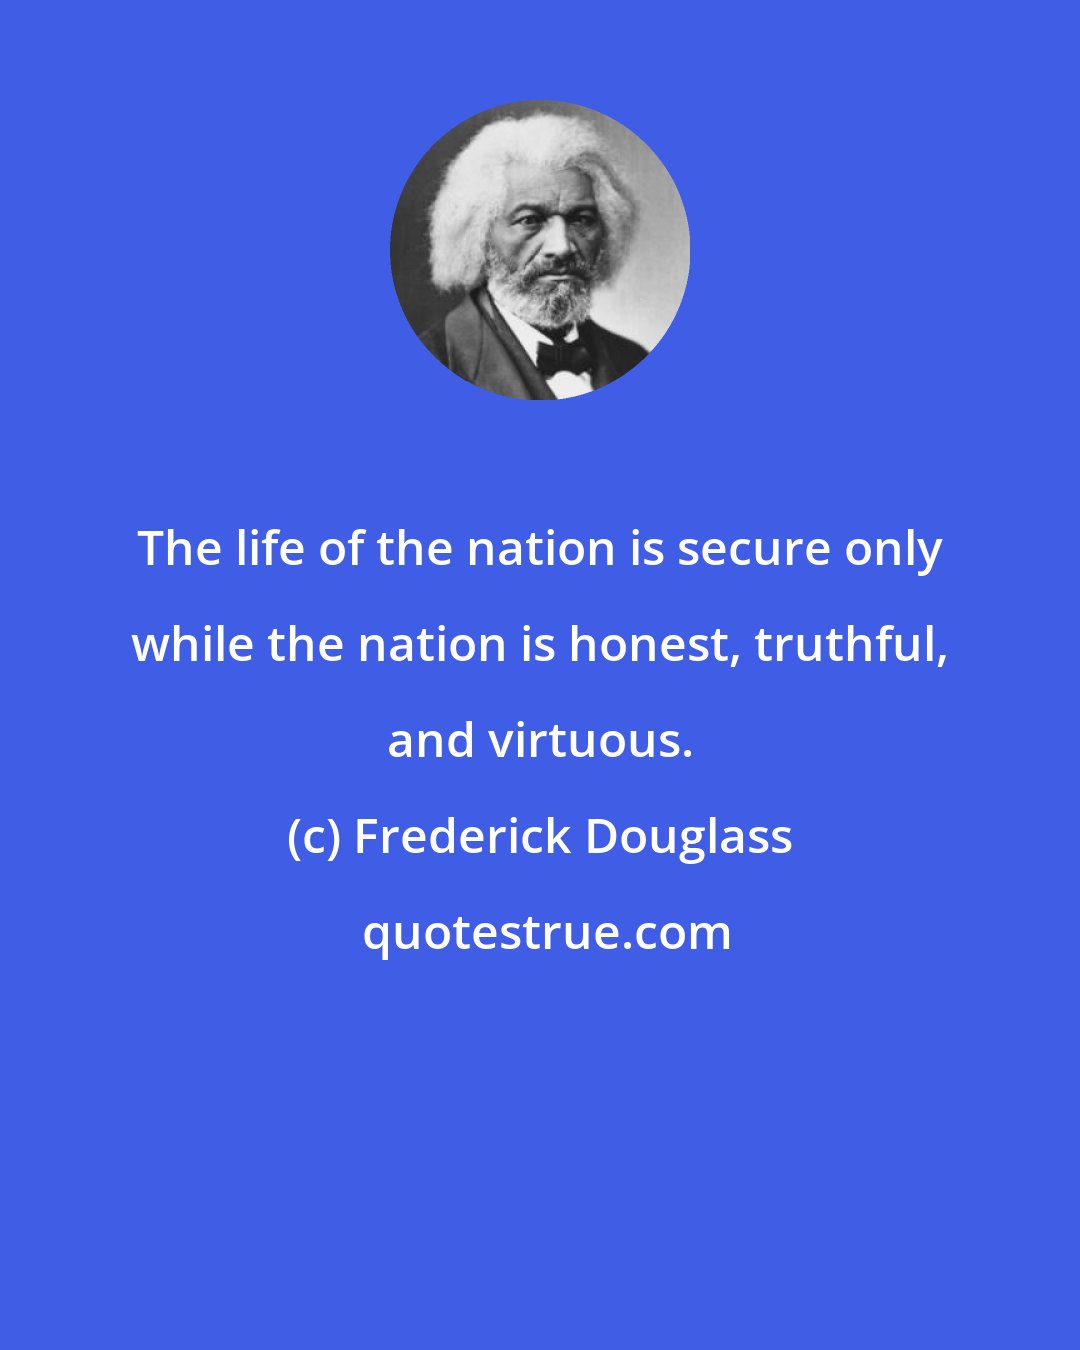 Frederick Douglass: The life of the nation is secure only while the nation is honest, truthful, and virtuous.